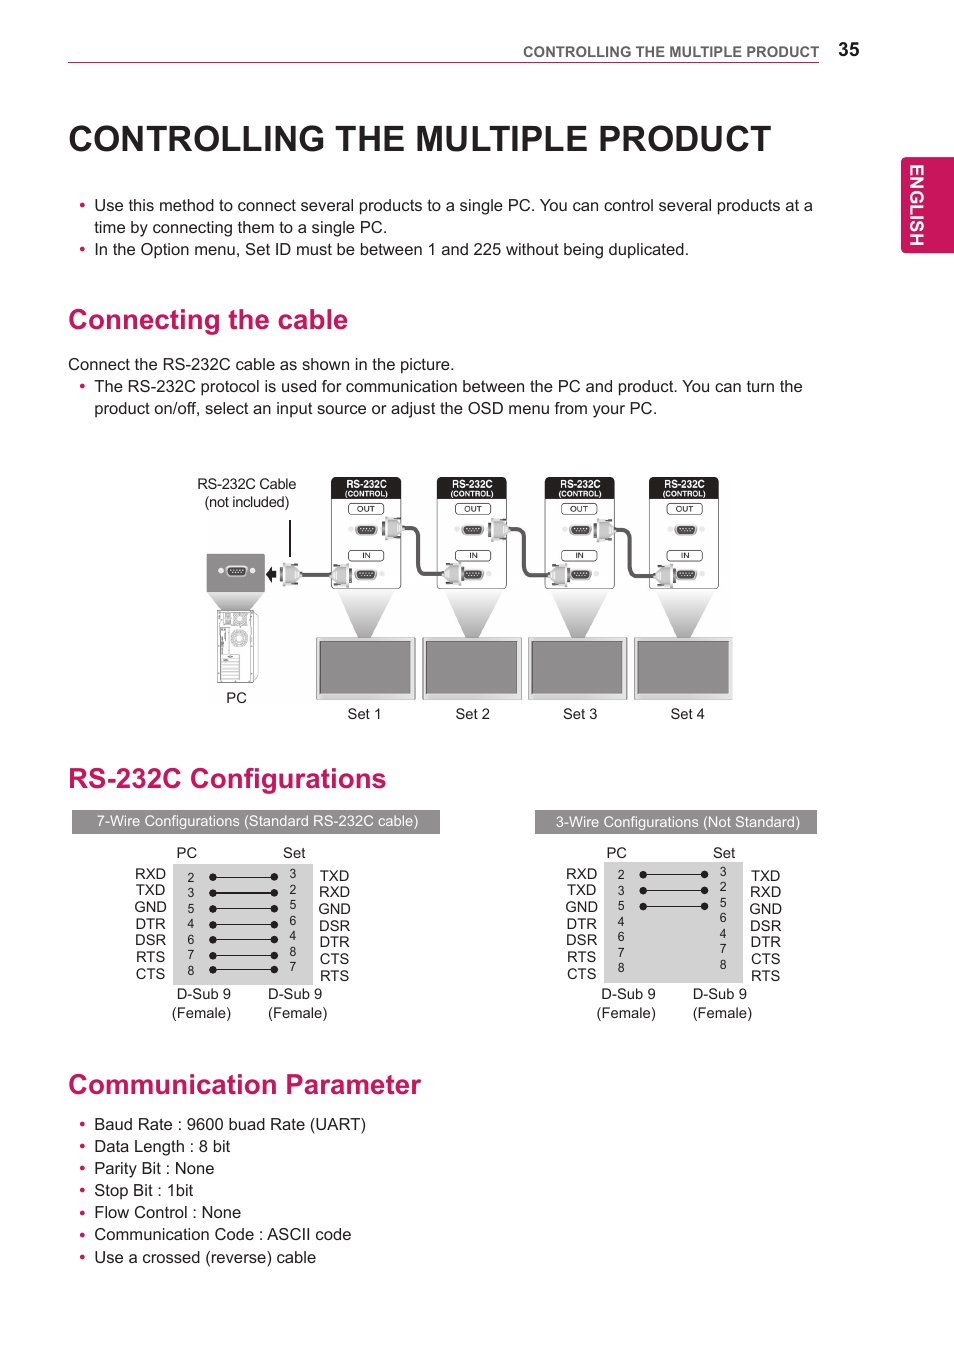 Controlling the multiple product, Connecting the cable, Rs-232c configurations | Communication parameter, Controlling the, Multiple product | LG 47VL10 User Manual | Page 35 / 48